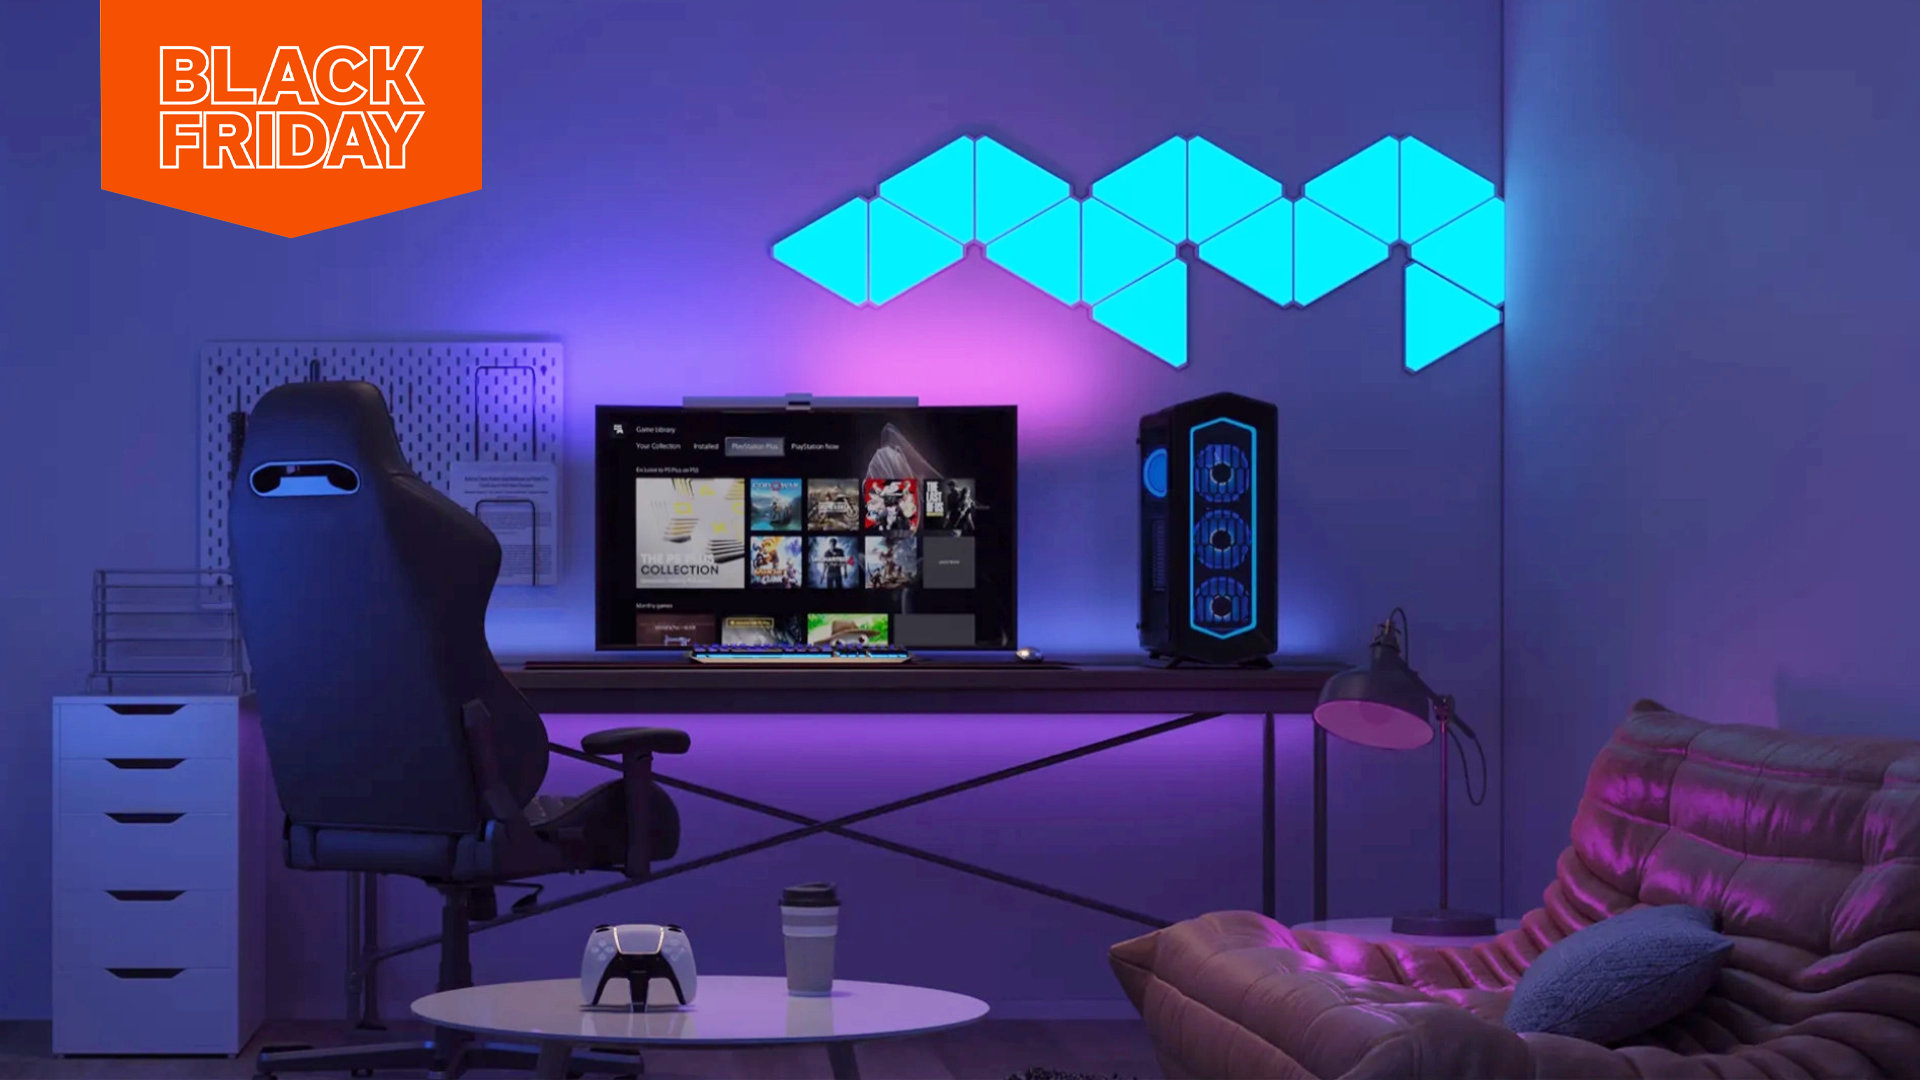 RGB LED light strip deals – Philips Hue, Govee, and on | PCGamesN